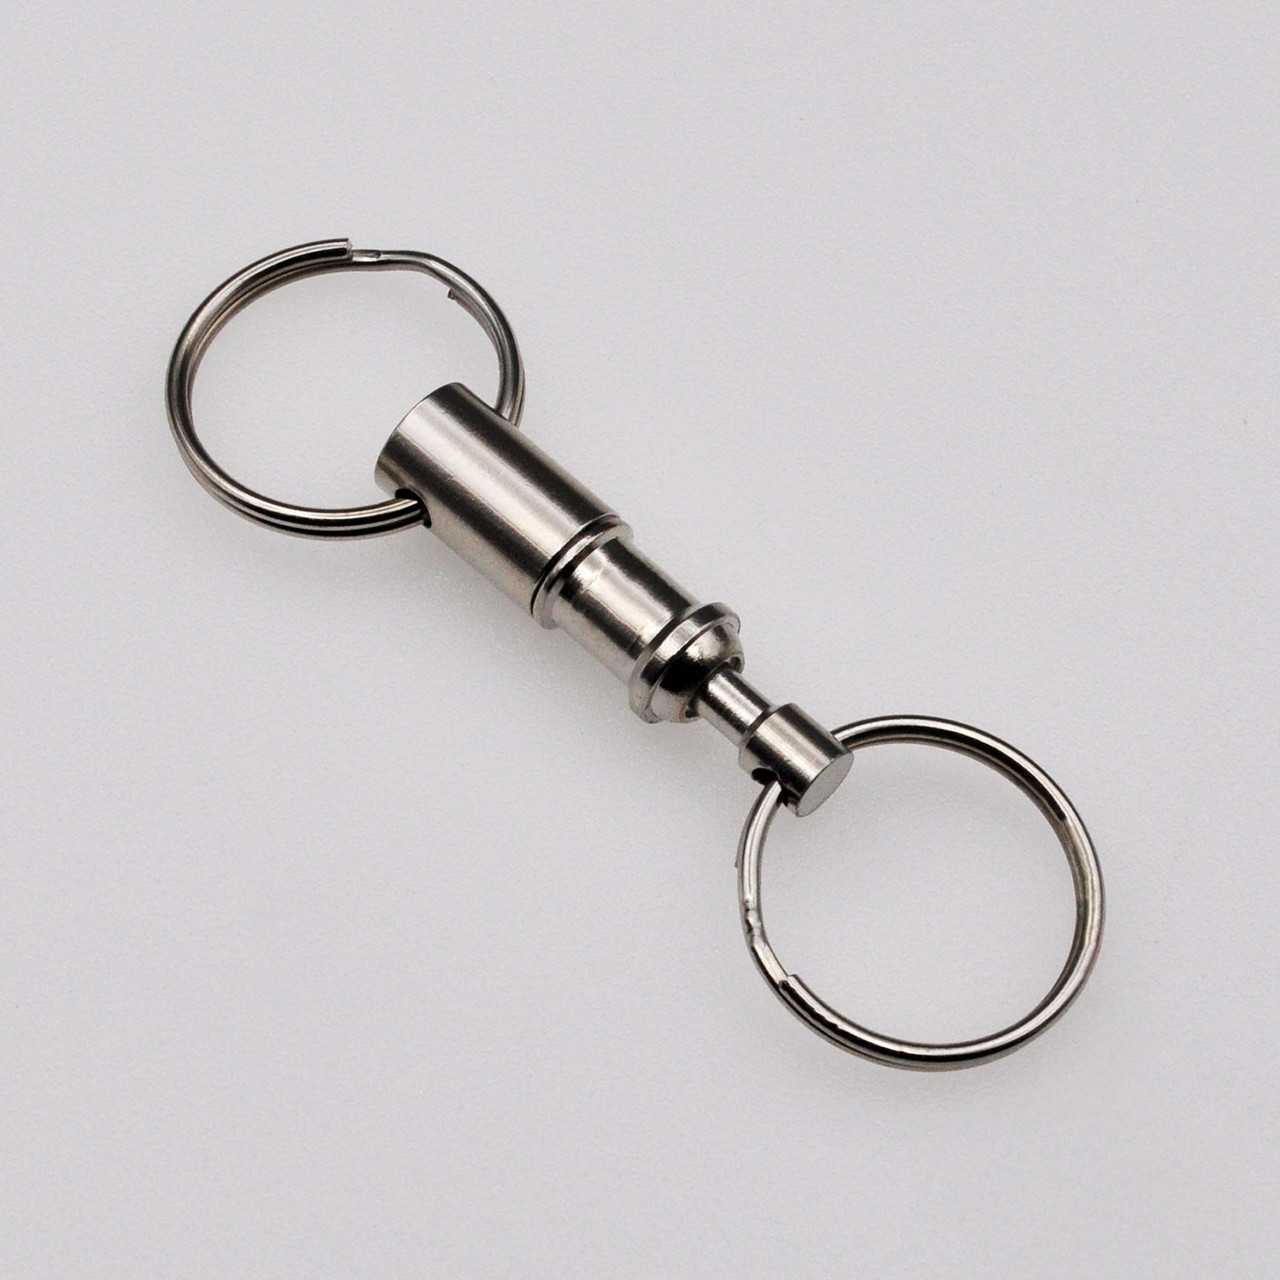 Shop for and Buy Nickel Plated Pull Apart Keychain Ball Bearing Release at  . Large selection and bulk discounts available.